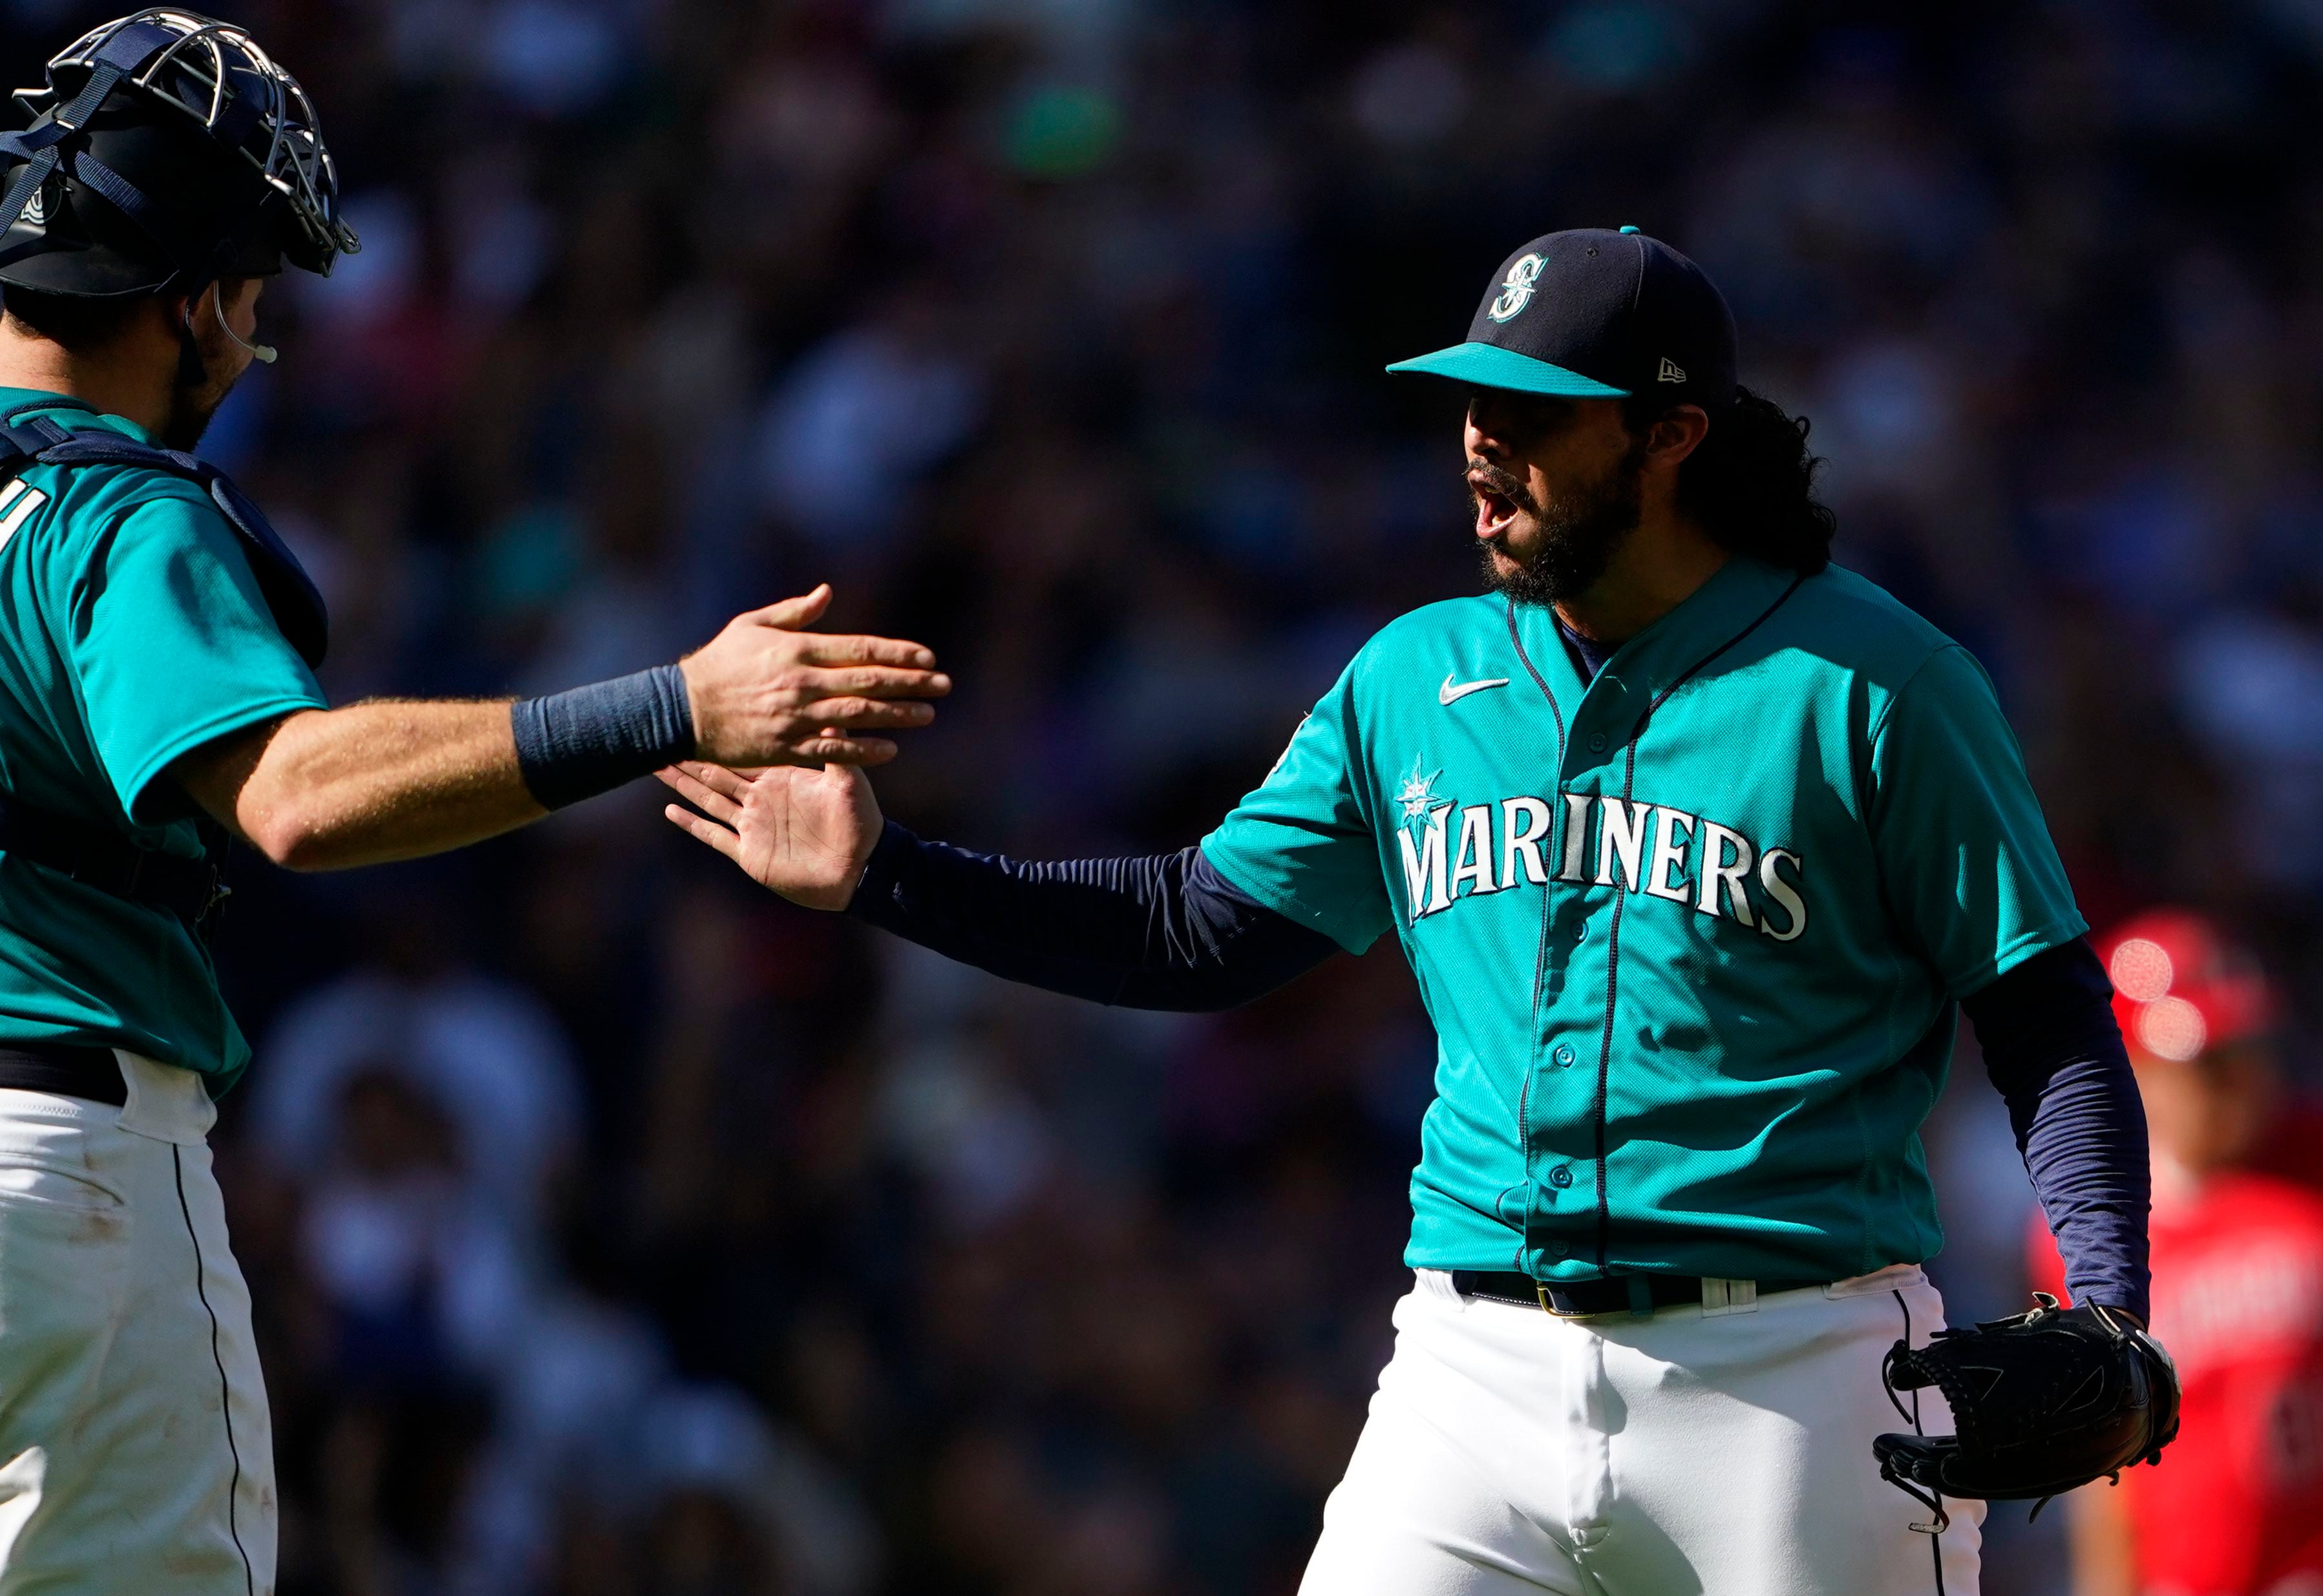 Rodríguez hits 3-run homer, Mariners beat Orioles 9-2 for 8th straight win  - ABC News